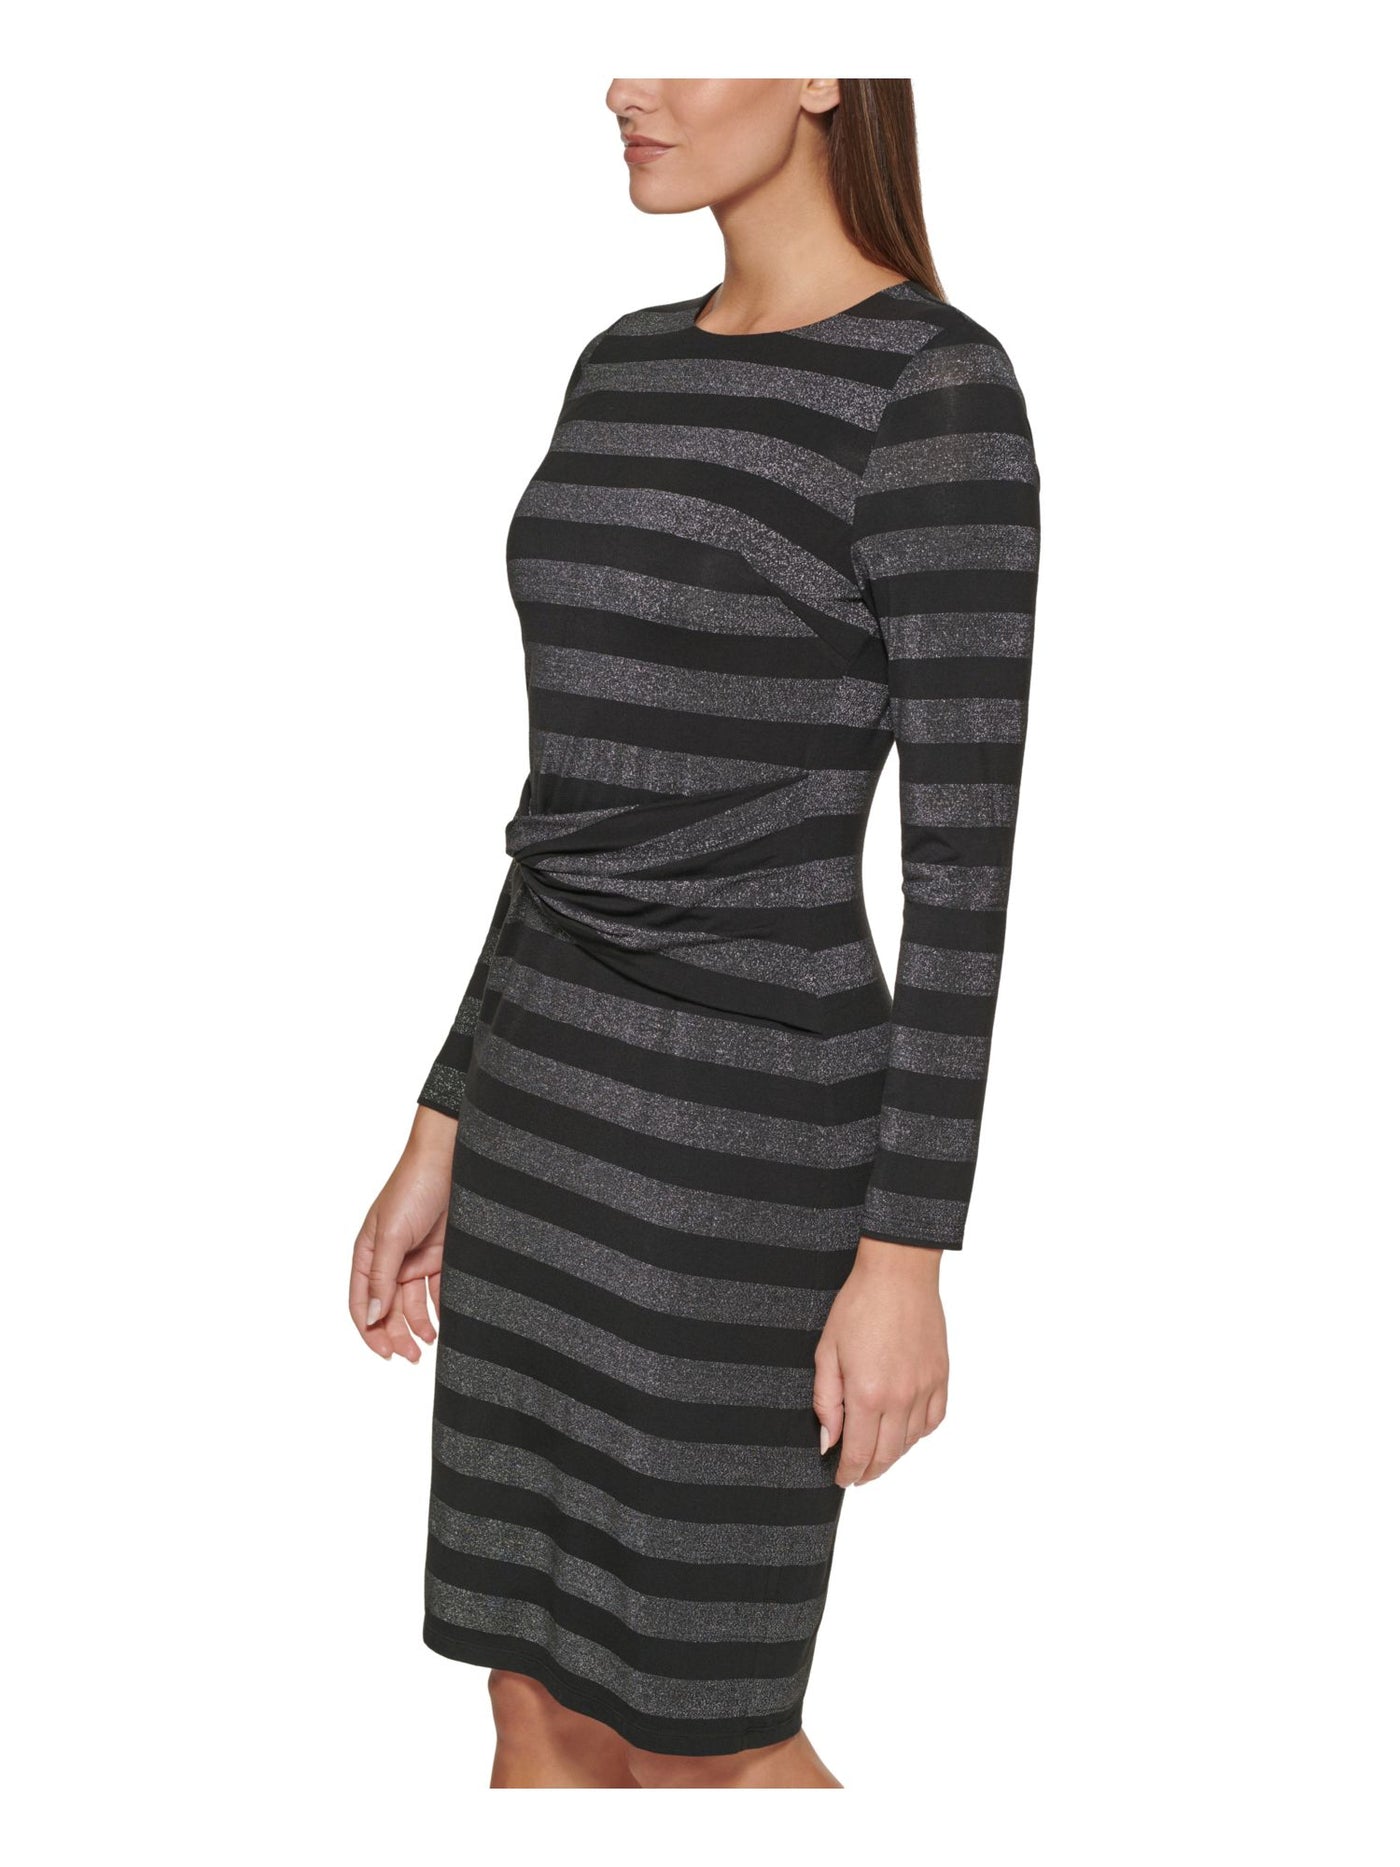 TOMMY HILFIGER Womens Black Zippered Unlined Twisted At Waist Striped Long Sleeve Round Neck Knee Length Sheath Dress 4